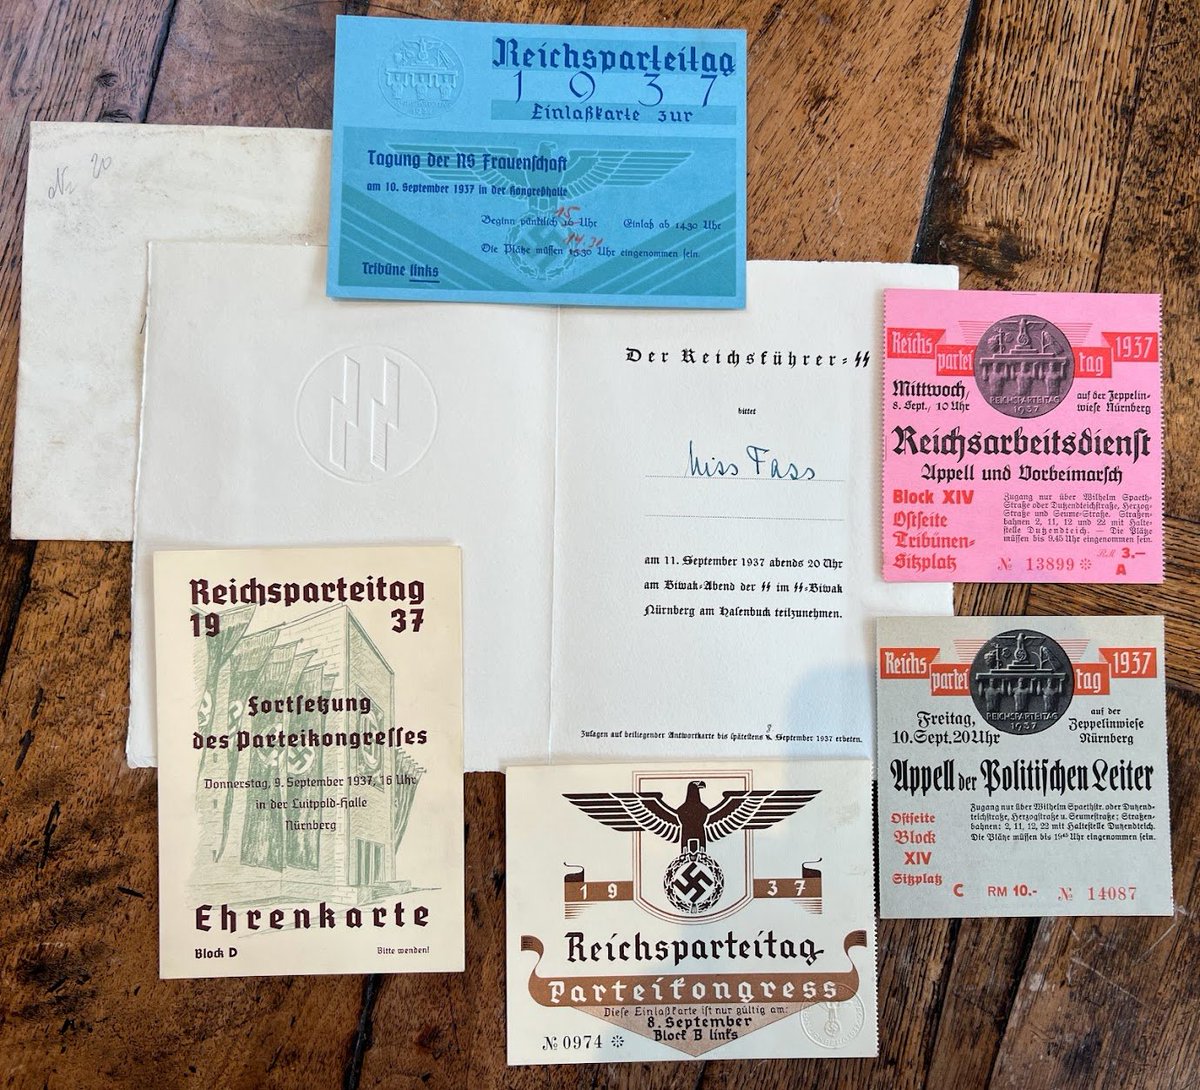 Intriguing recent discoveries, Part 1. Found in a suitcase of interwar Anglo-German ephemera. Tickets for a British visitor to the key events at the 1937 Reichsparteitag (Nazi Party Rally). #CoffeewithHitler @OneworldNews